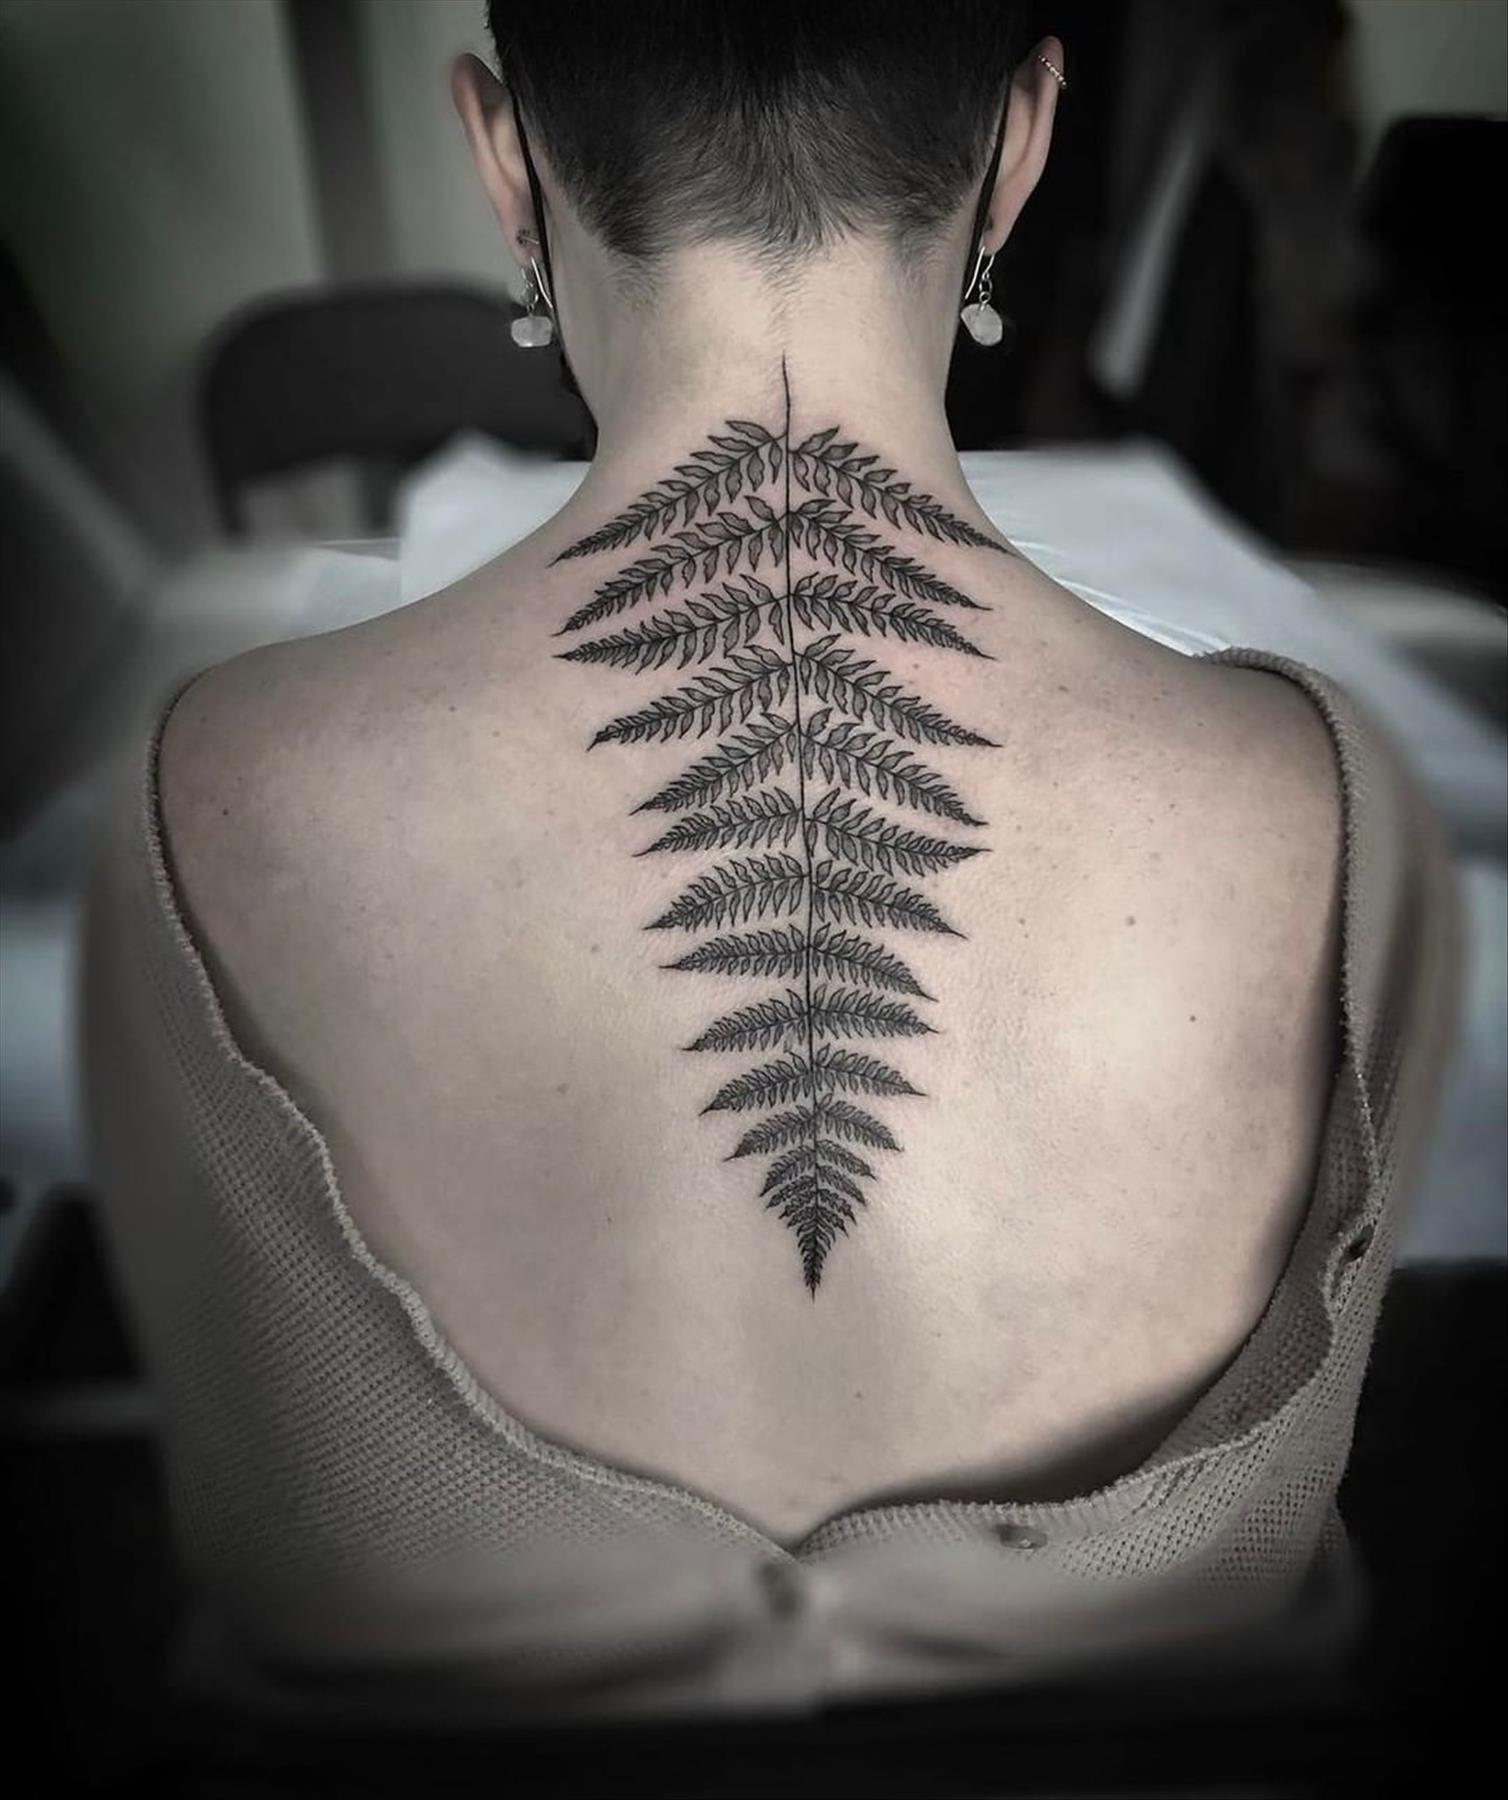 Chic spine tattoos and back tattoos for cool women